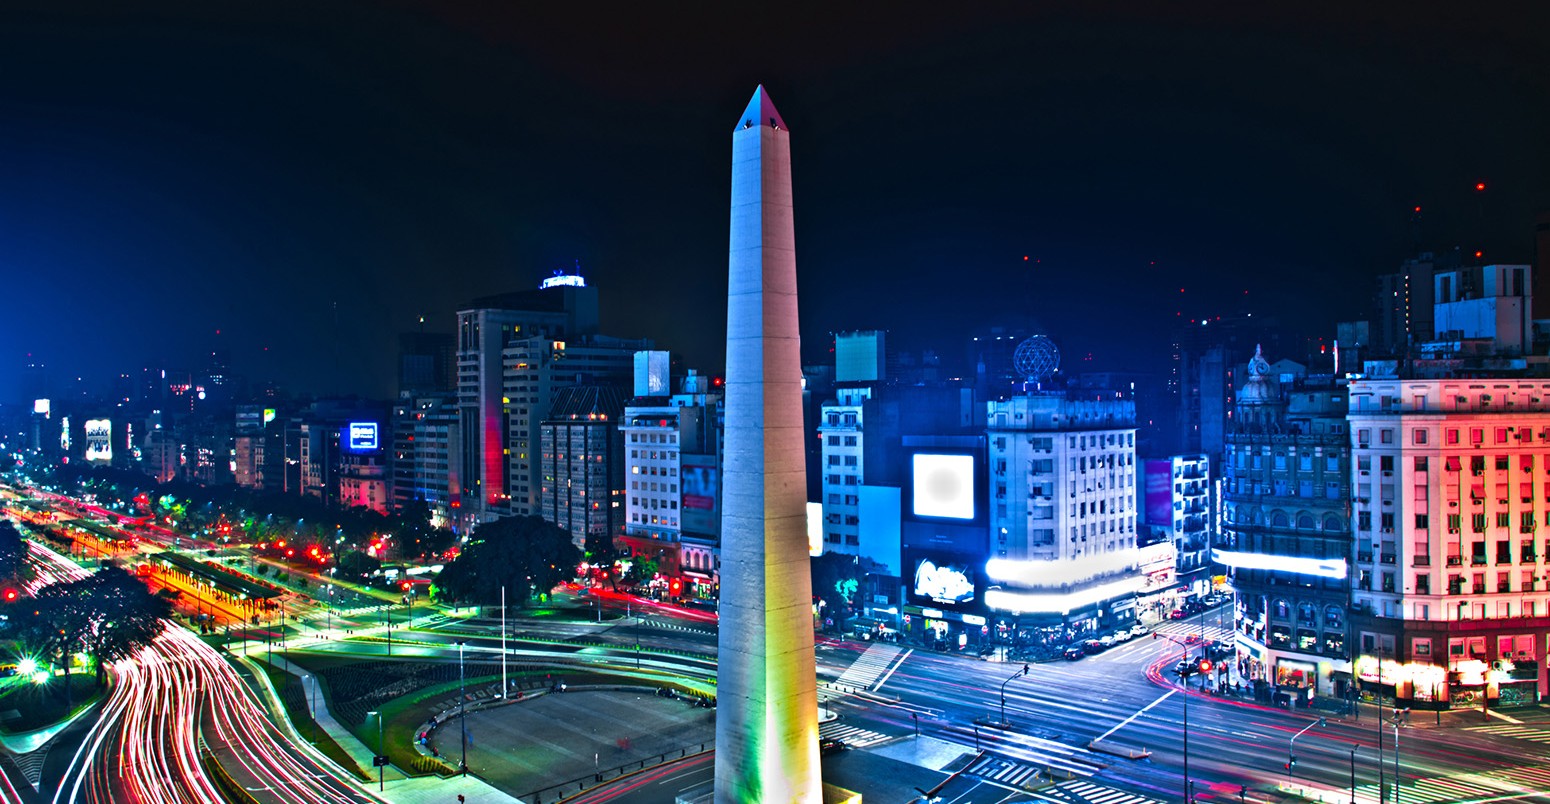 The city of Buenos Aires at night